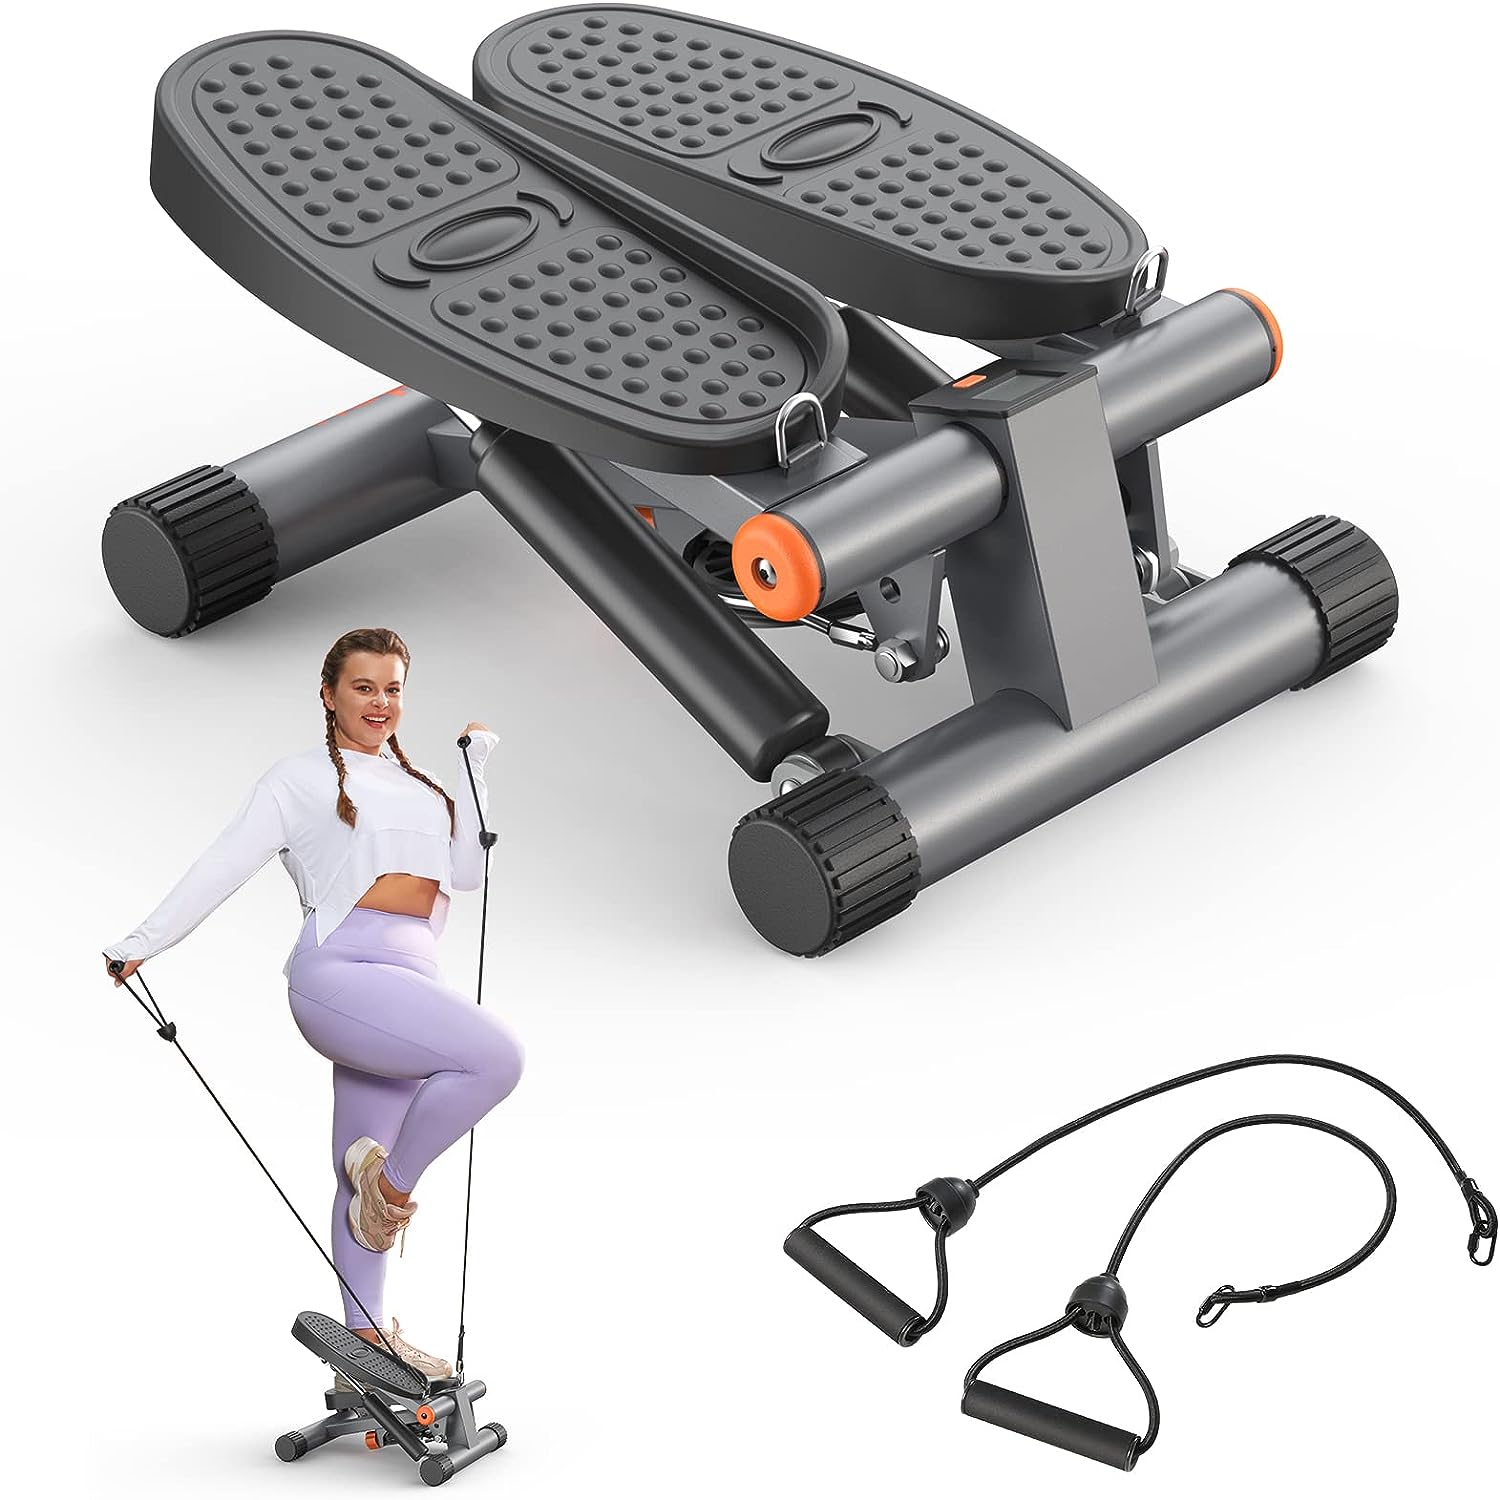  Steppers for Exercise, Stair Stepper with Resistance Bands, Mini Stepper with 300LBS Loading Capacity